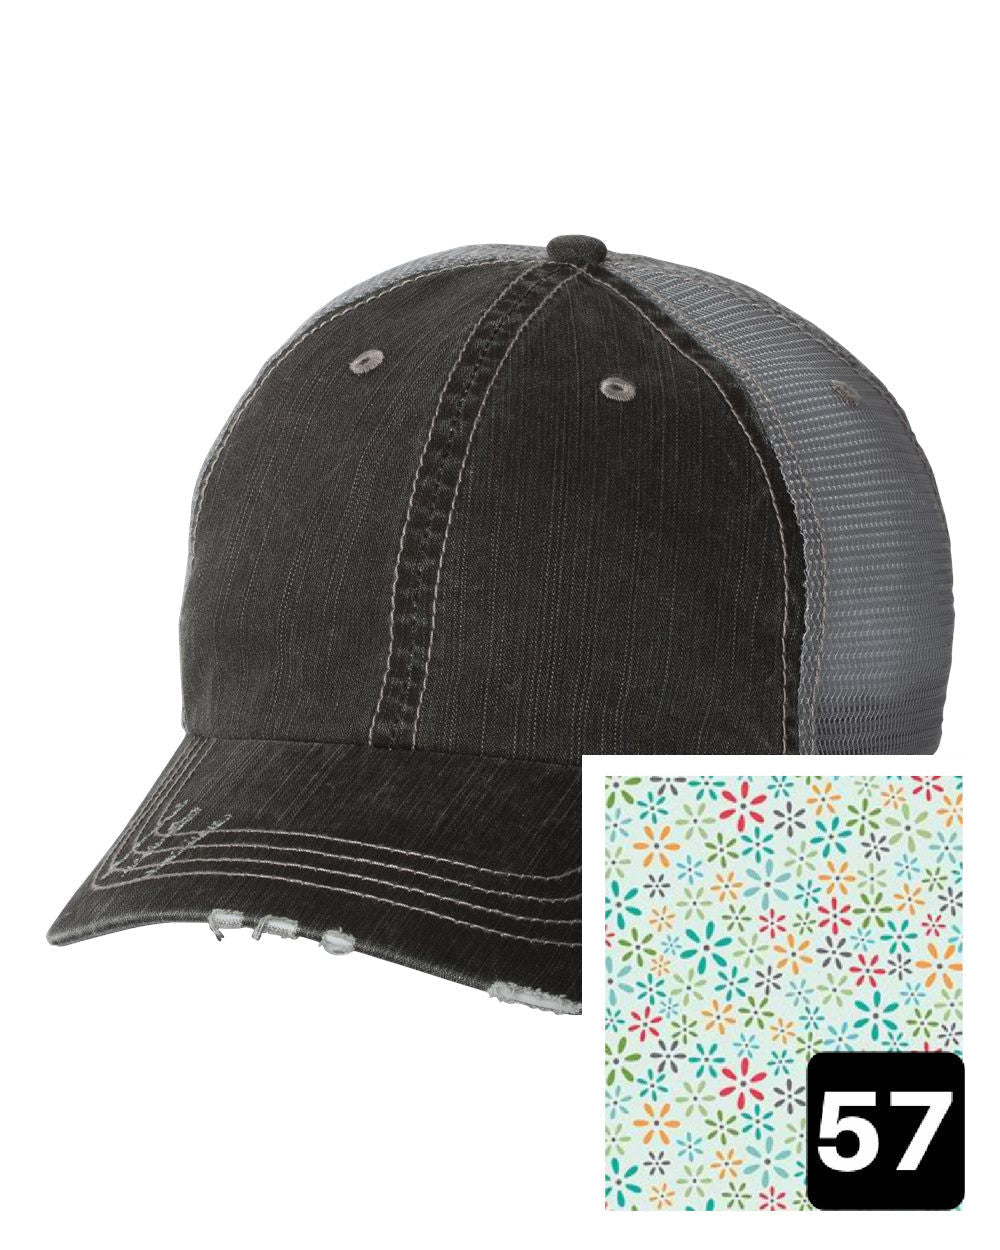 gray distressed trucker hat with white daisy on yellow fabric state of Ohio